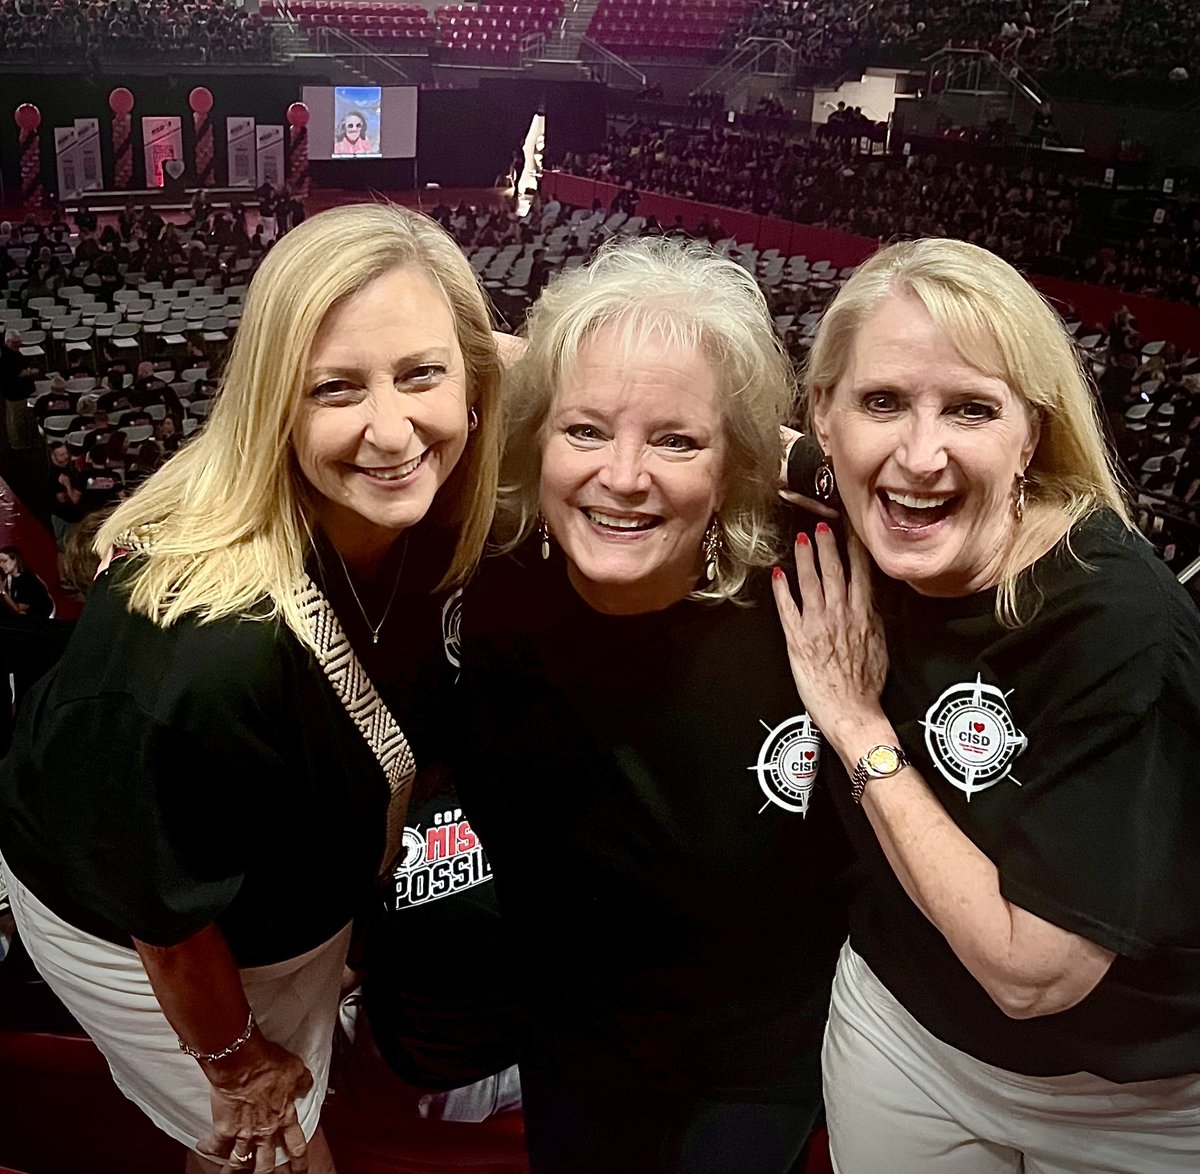 Coppell ISD Convocation! Let's go! Ready for 23-24....it's going to be a great year!
#CISDlearns #westfam #coppellisd #coppellmswest